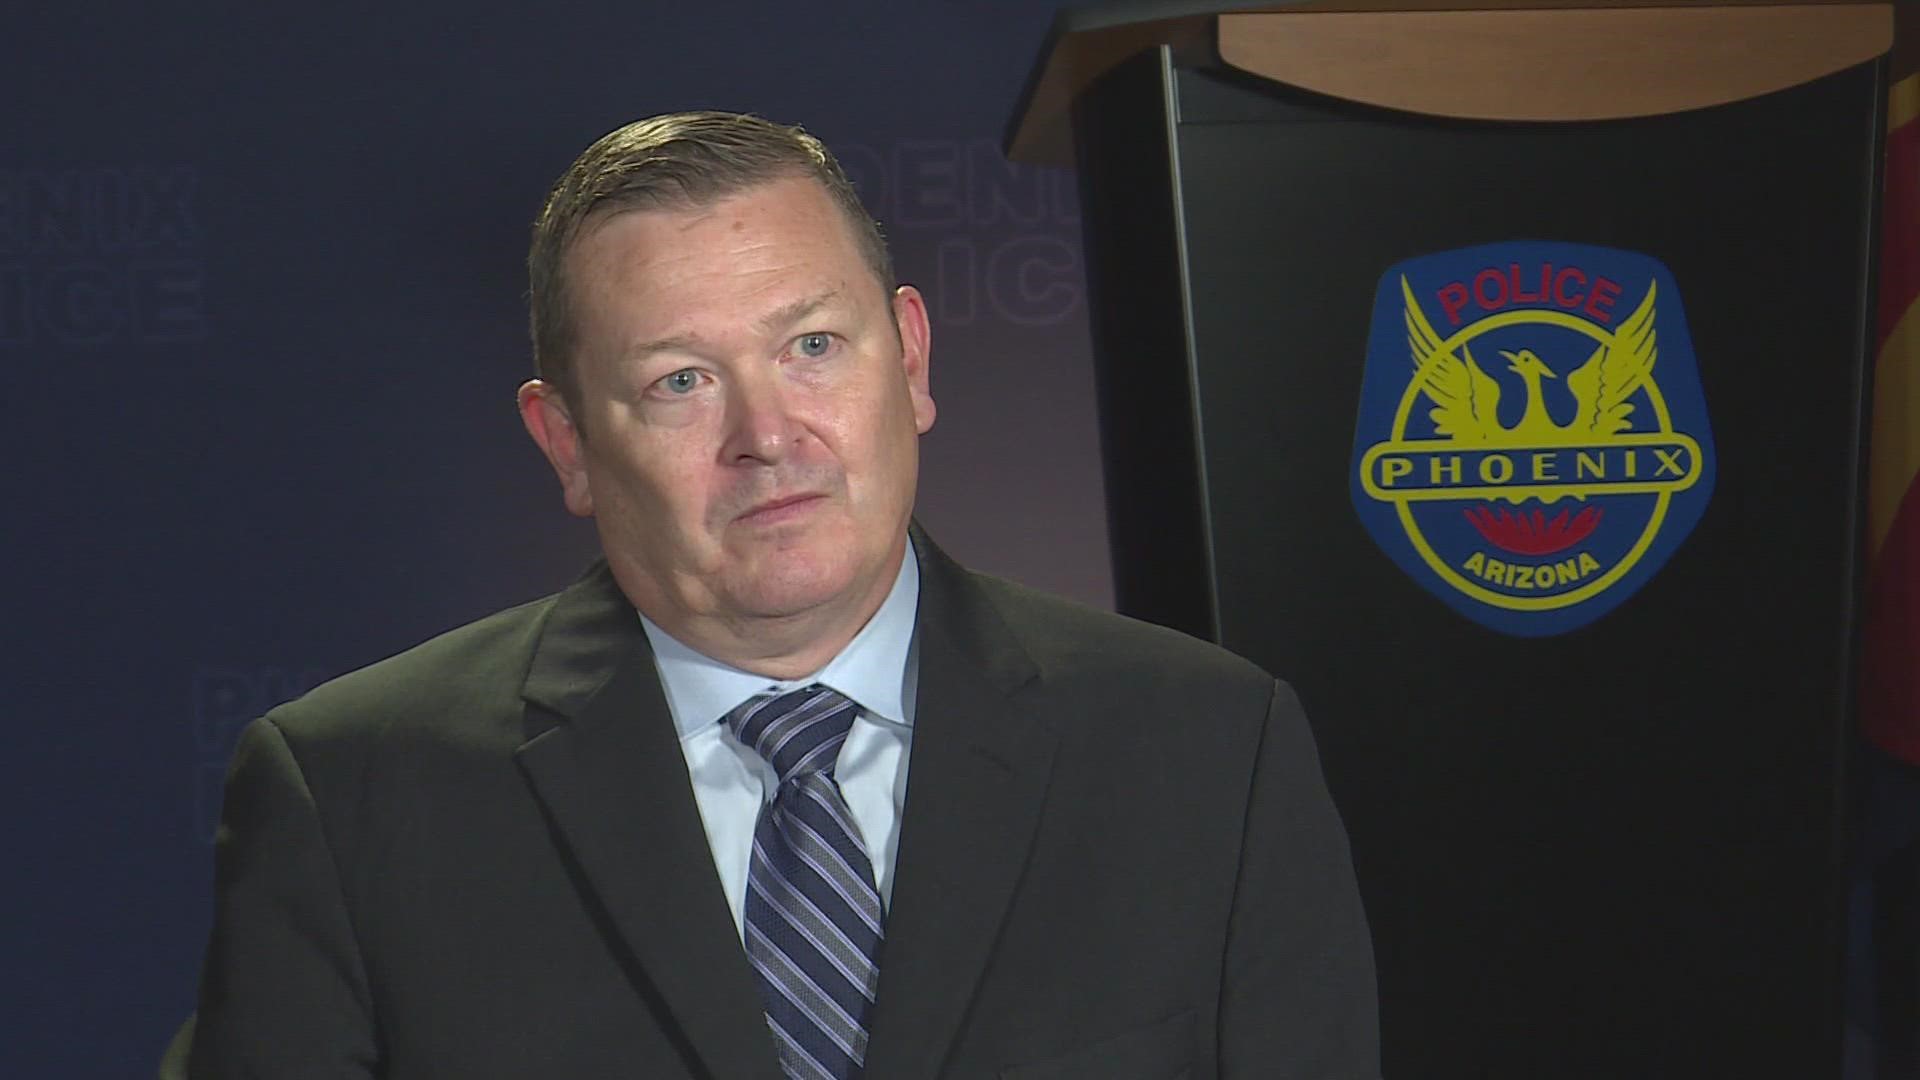 Residents around Phoenix told 12News what changes they hope to see from the Phoenix Police Department as a new interim chief takes over the agency.